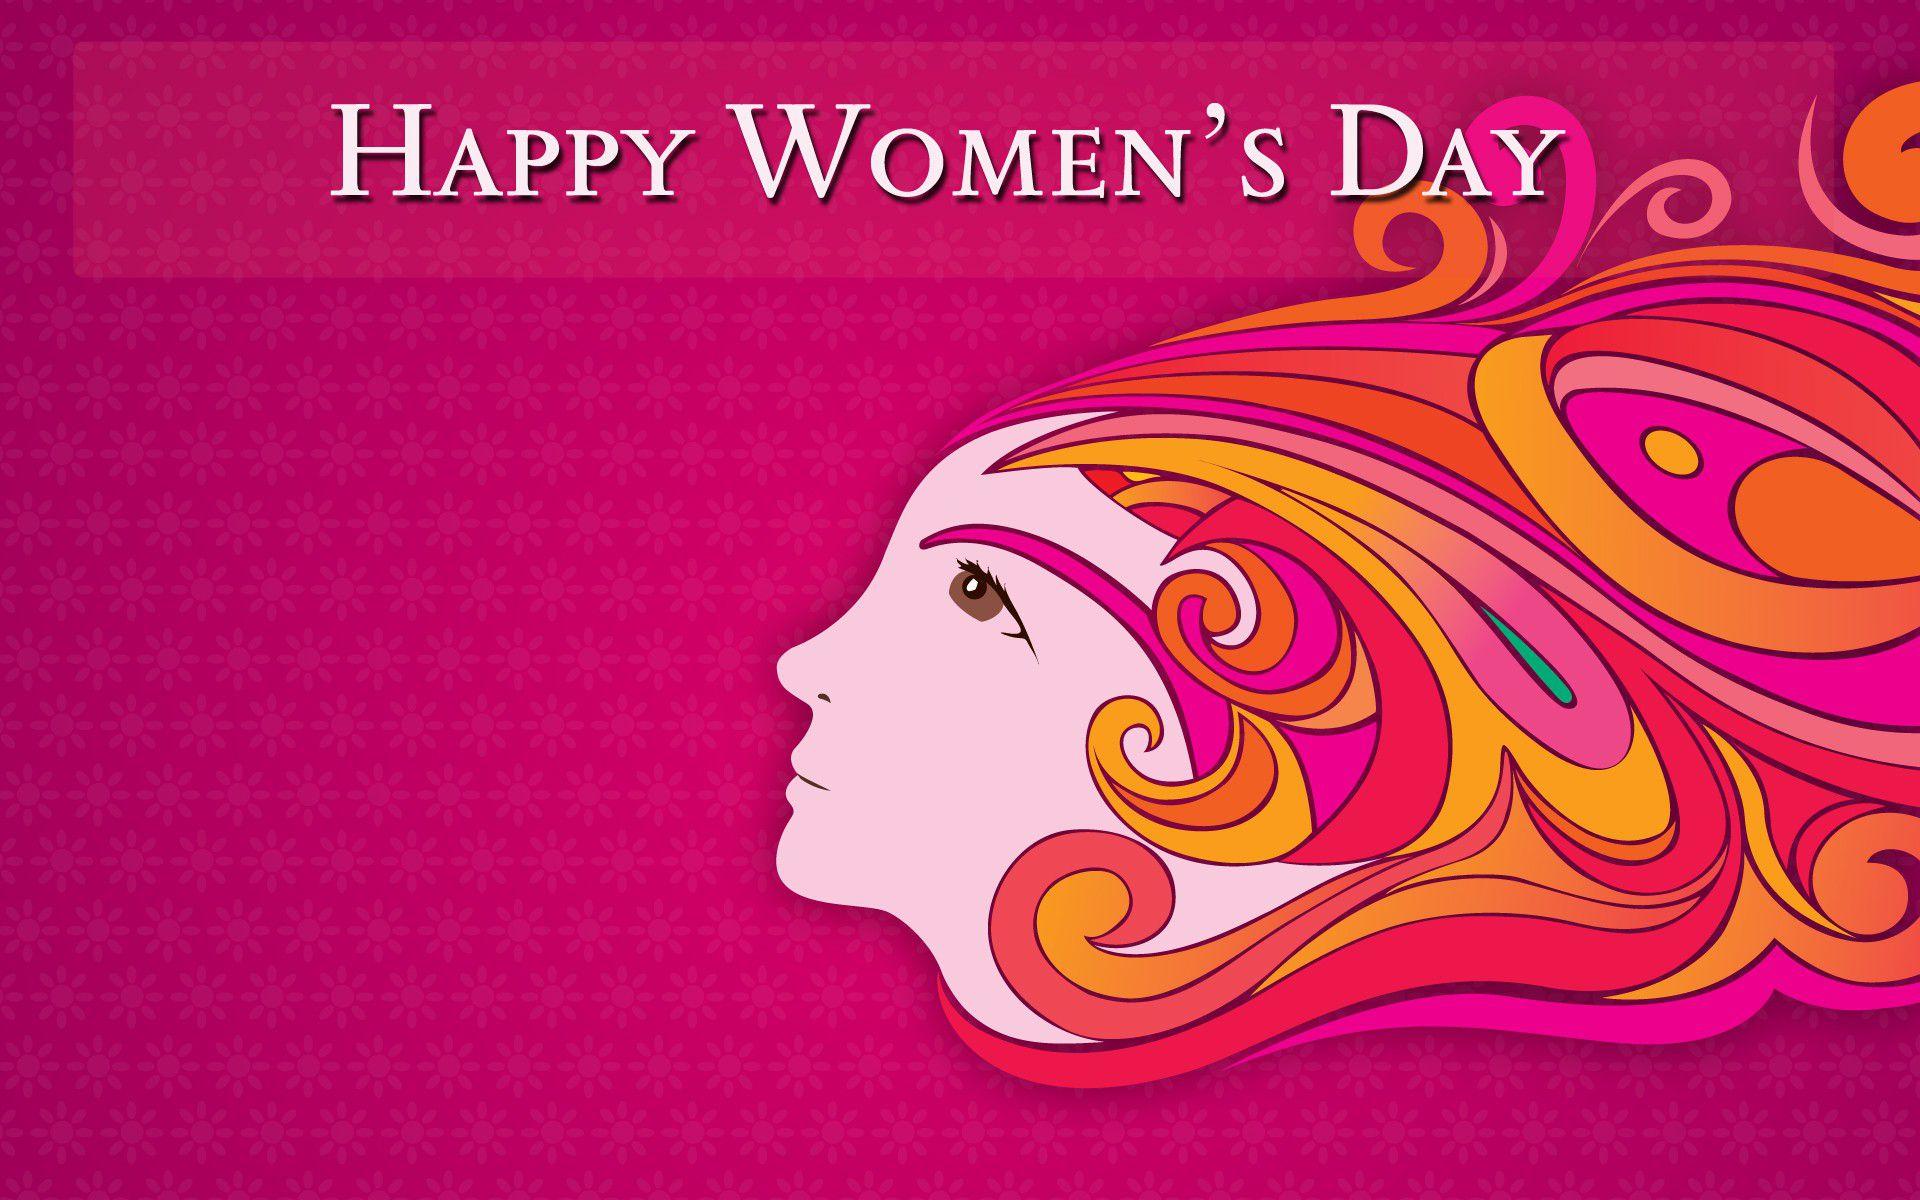 Women's Day Wallpaper Day Celebrations Image Hd, Download